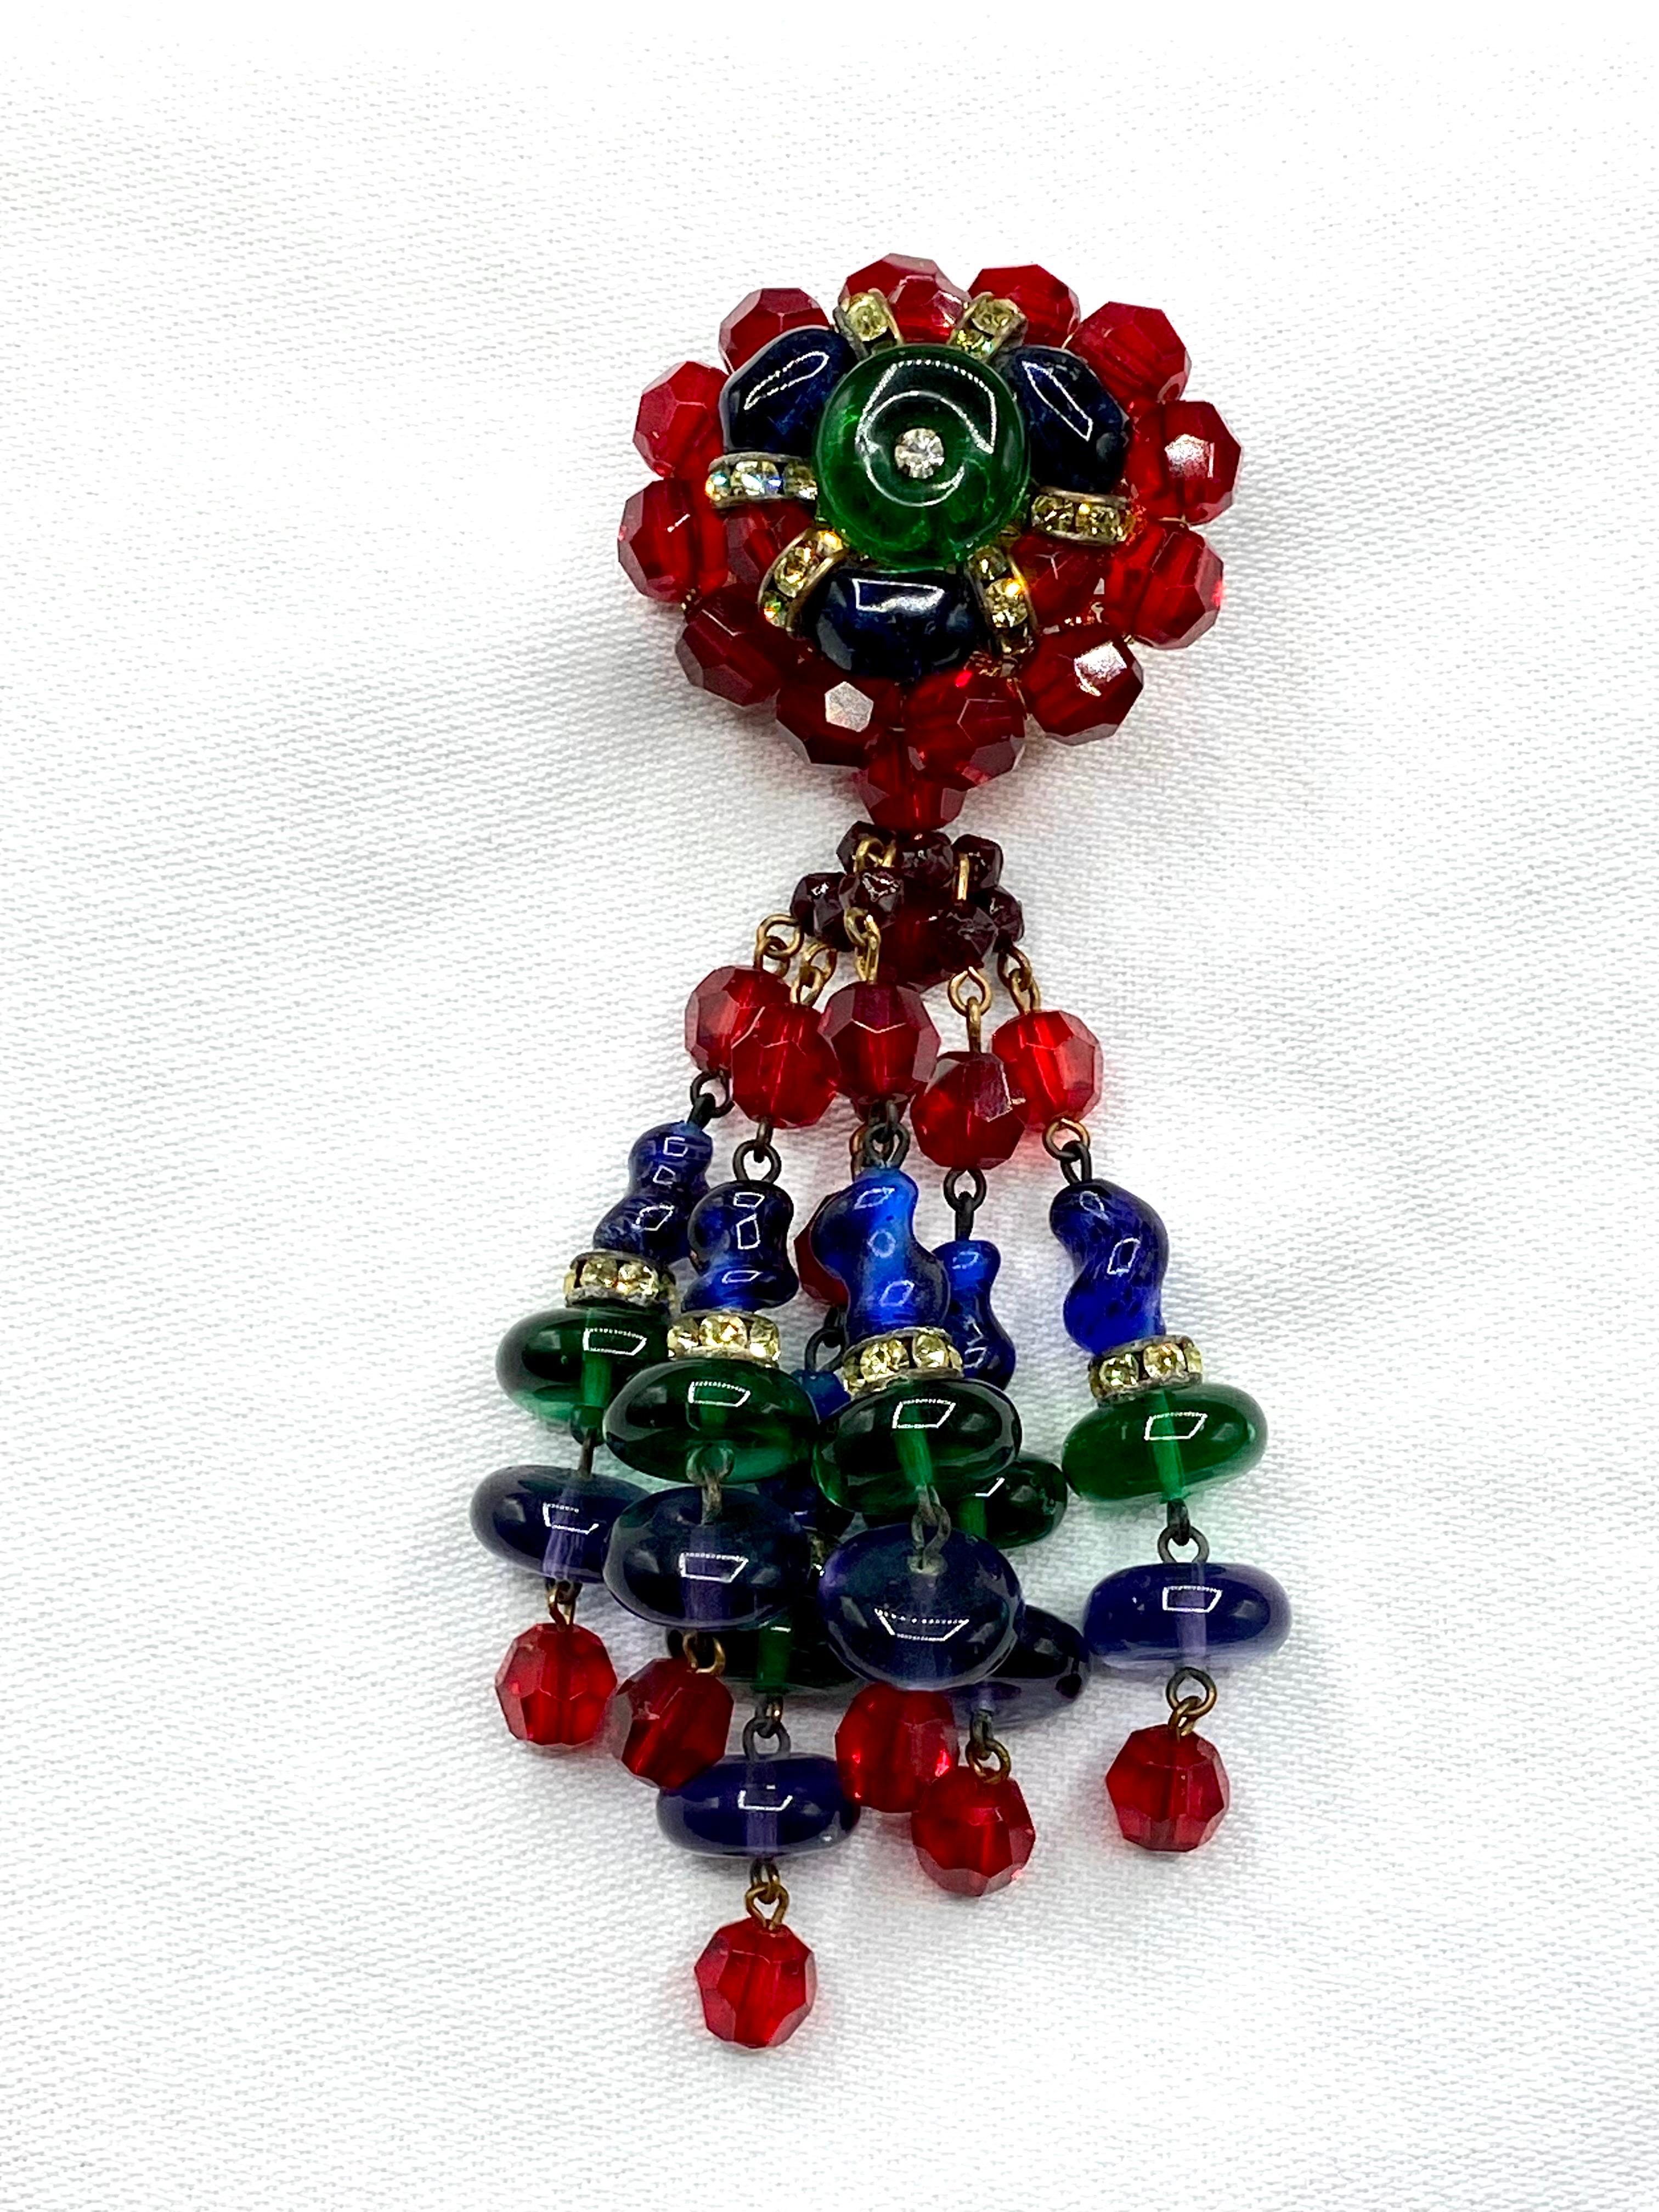 A colorful and fun Hattie Carnegie molded glass and crystal bead tassel brooch from the 1950s. The top oval button piece has a molded green glass donut shape set with a center rhinestone. It is surrounded by a row of molded blue glass beads,